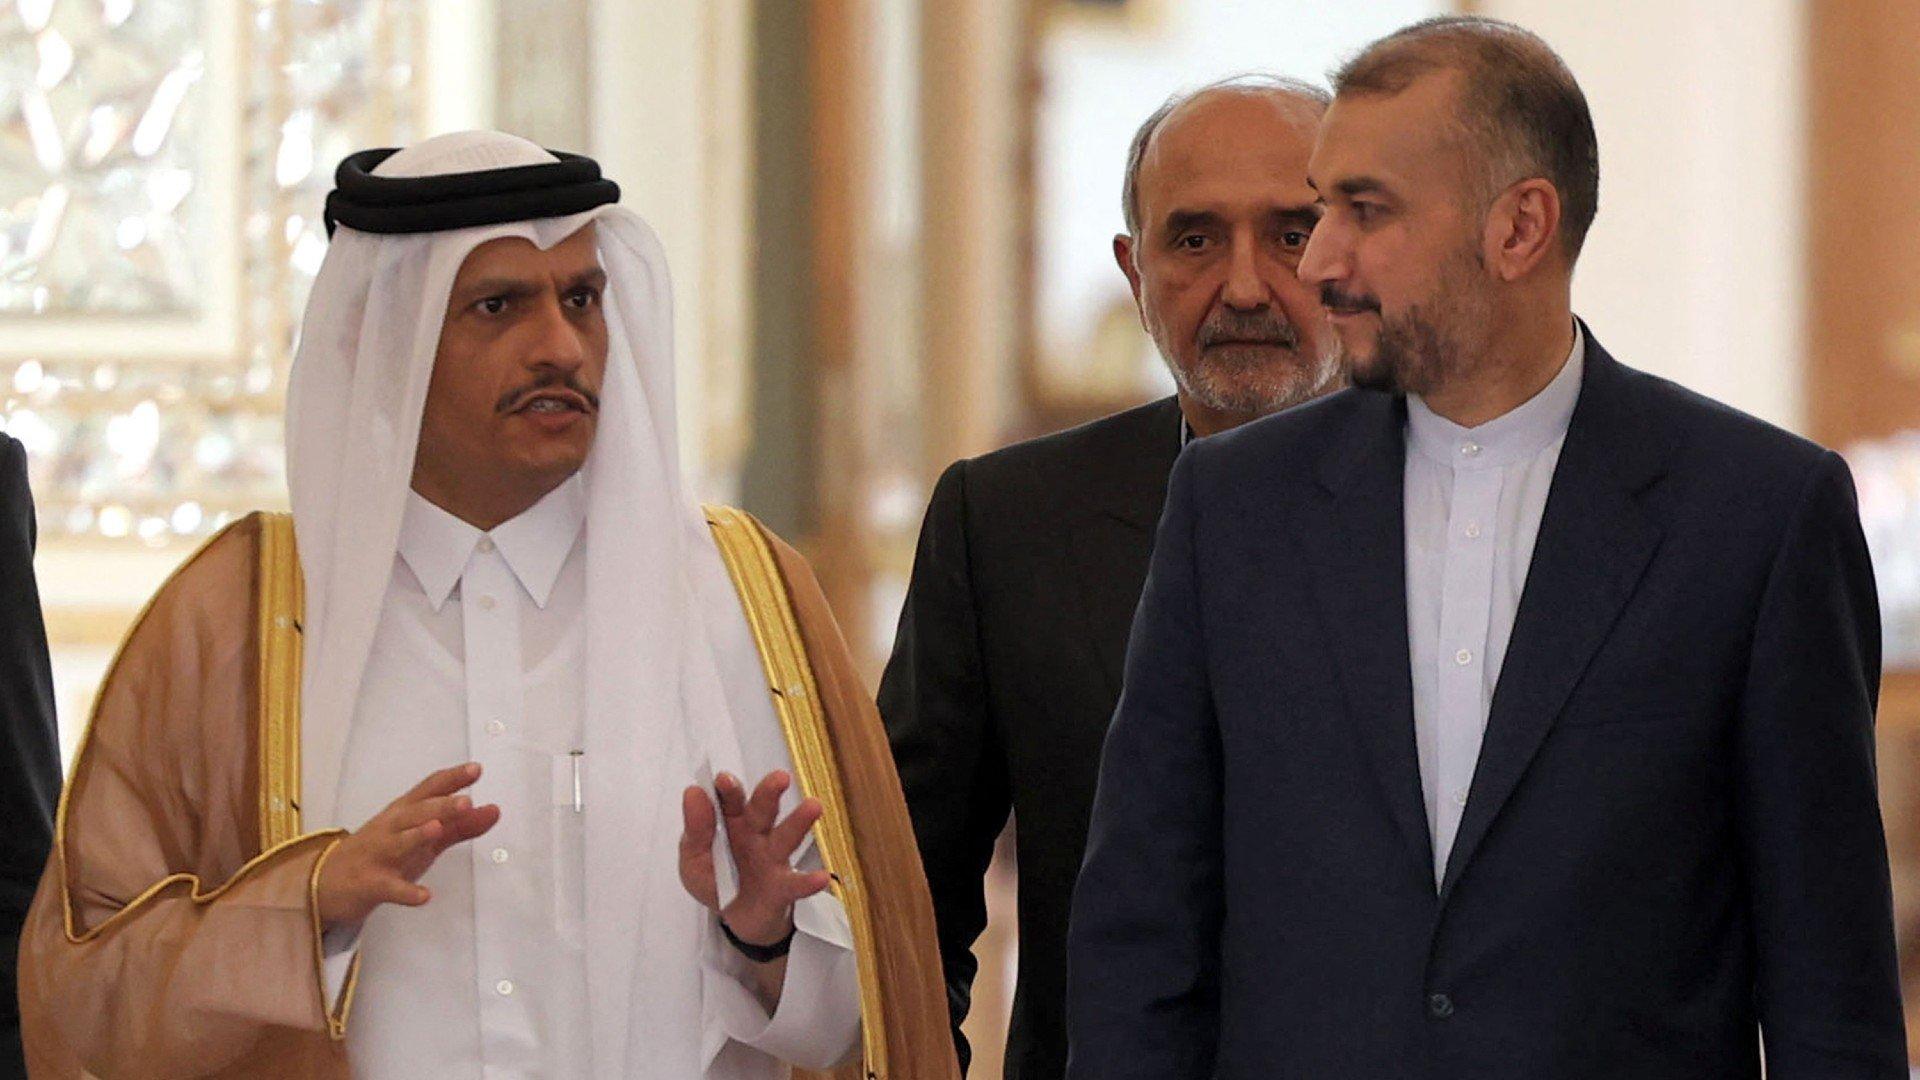 (R to L) Iran's Foreign Minister Hossein Amir-Abdollahian and Qatar's Foreign Minister Mohammed bin Abdulrahman al-Thani arrive for a joint press conference in Tehran on 7 July 2022.